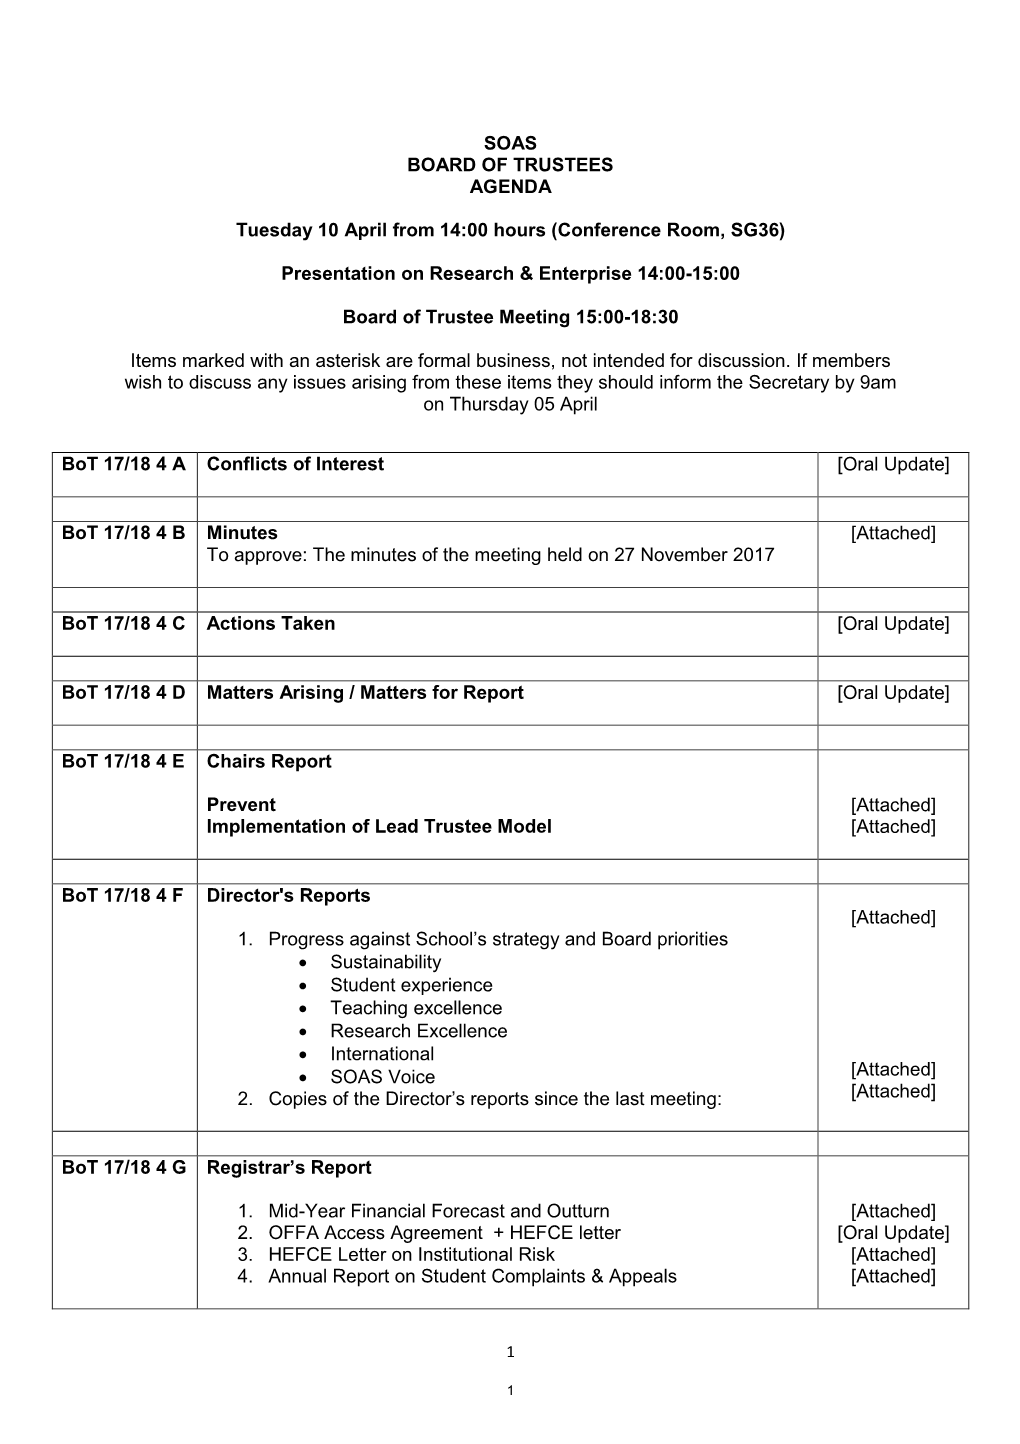 SOAS BOARD of TRUSTEES AGENDA Tuesday 10 April from 14